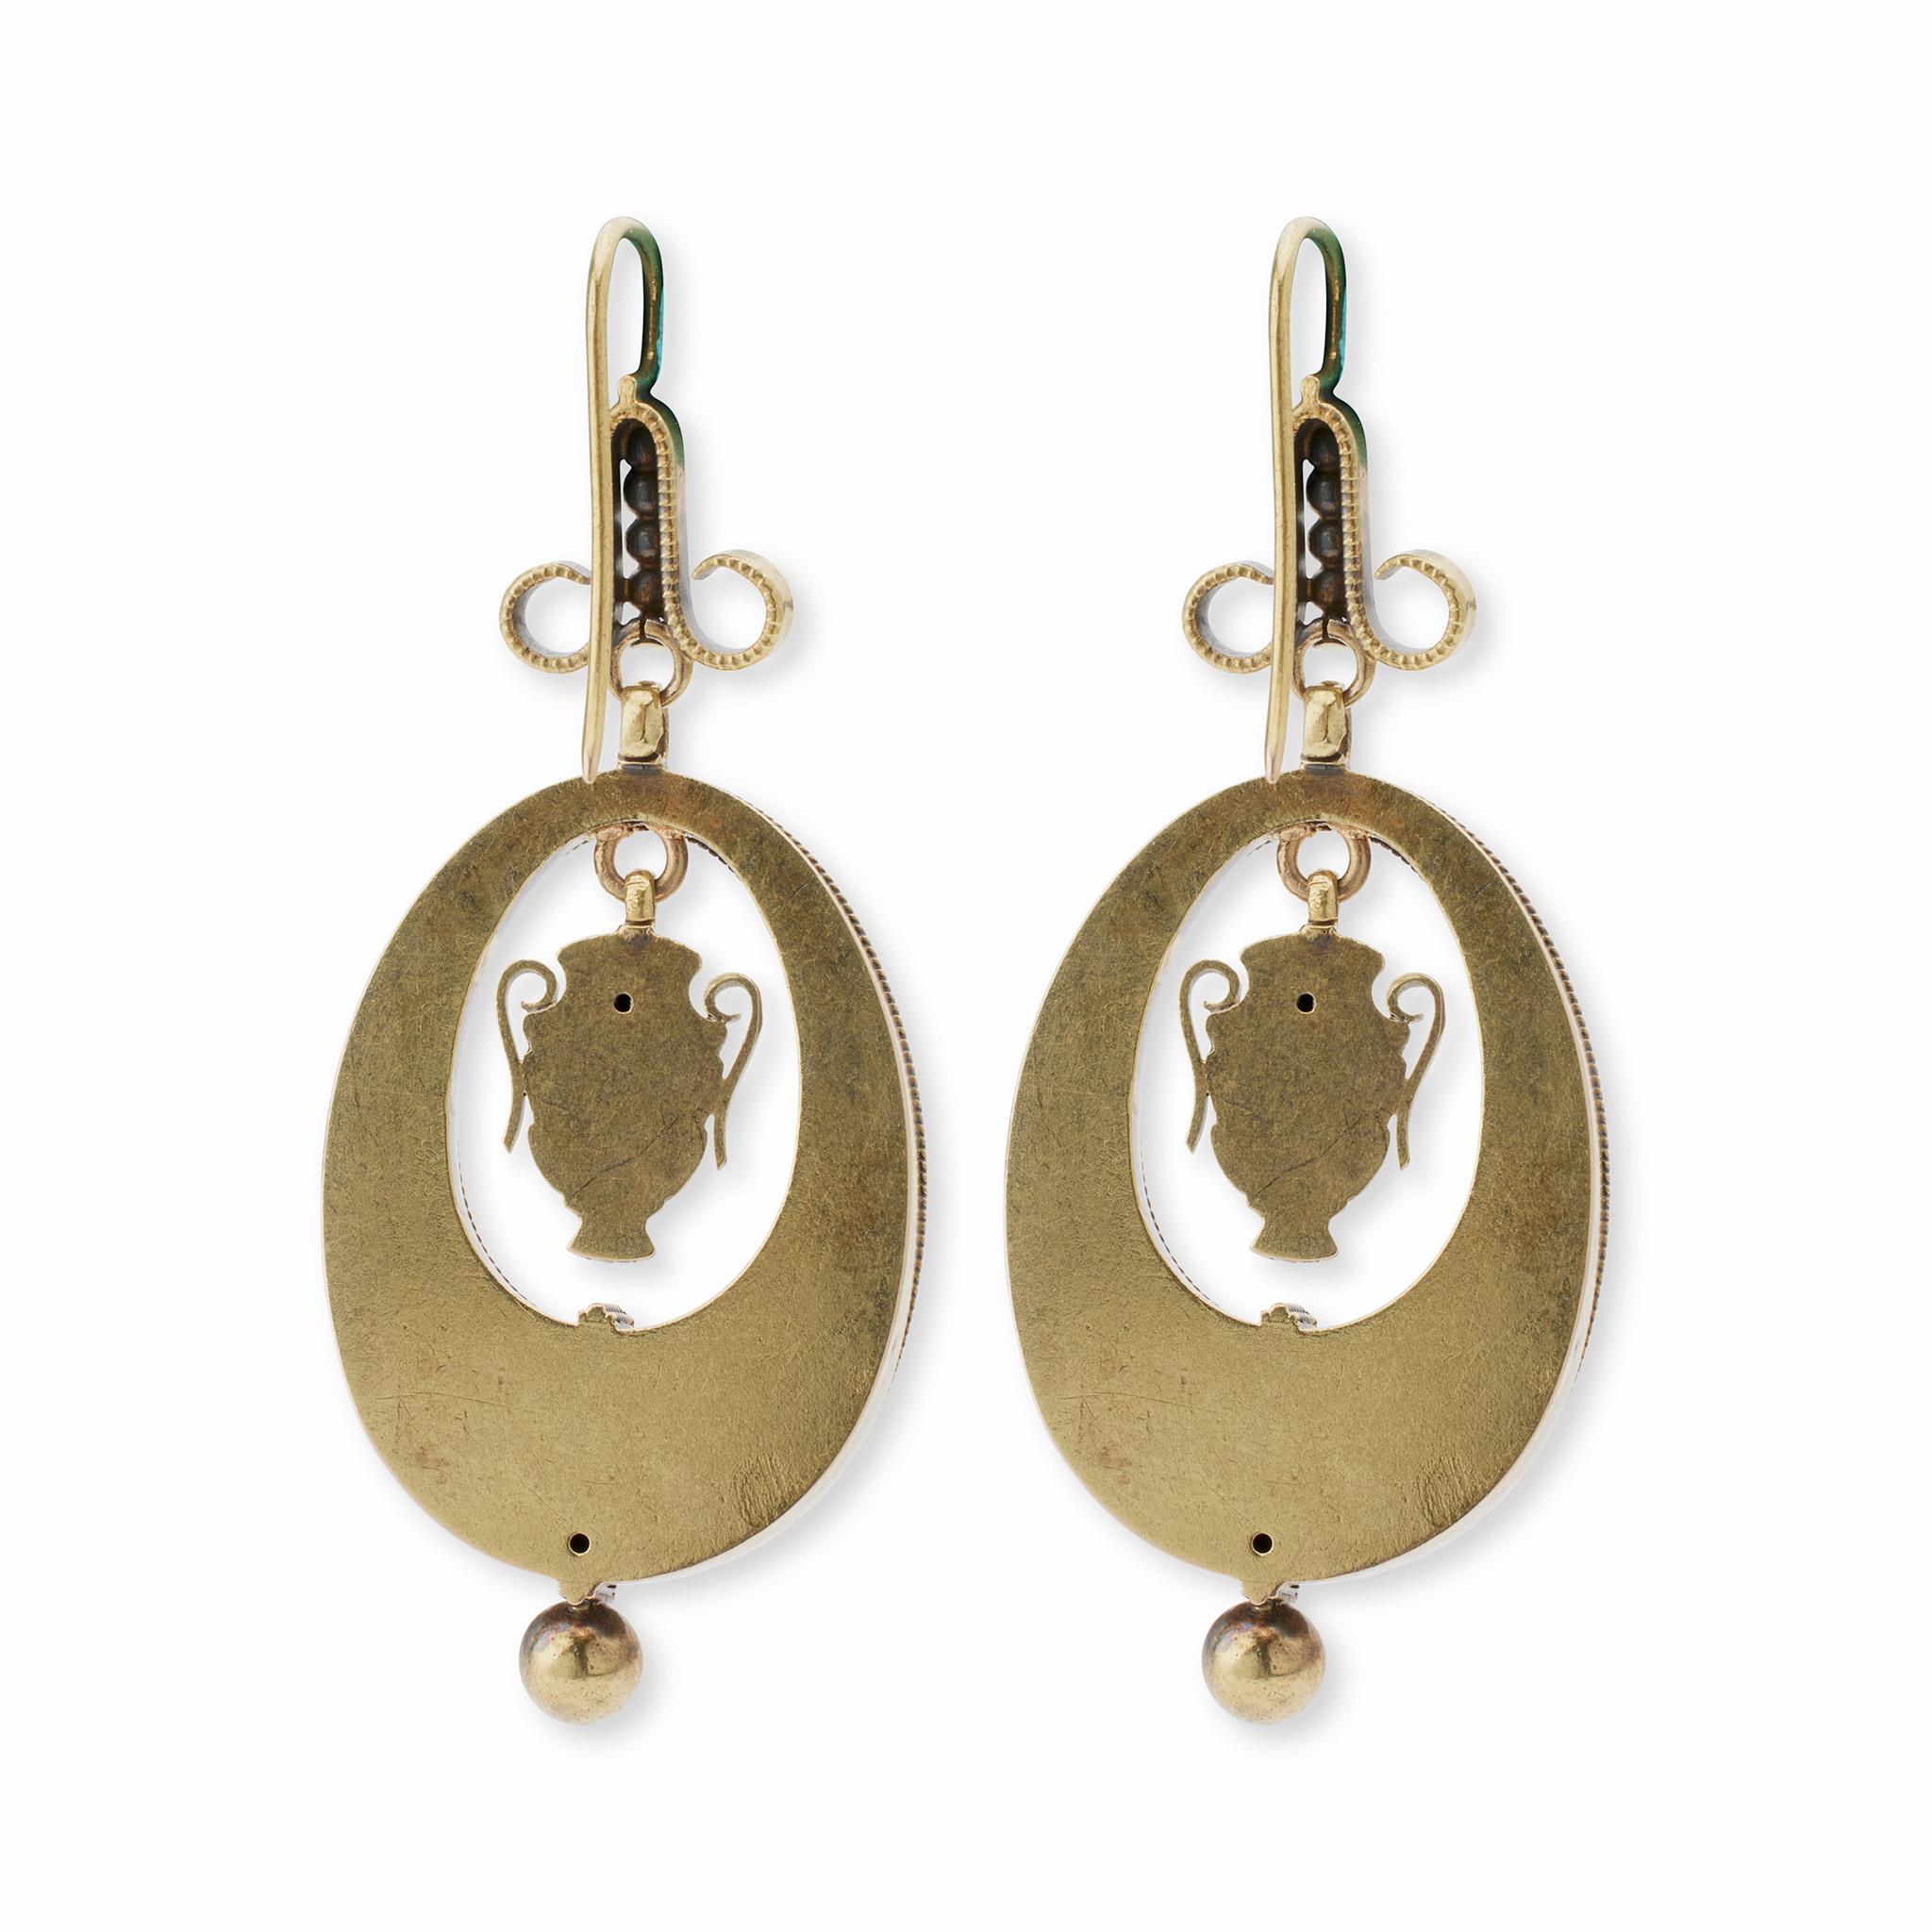 Dating from the 1870s, these pendant earrings are composed of 18K gold. Each is designed as a line of spheres flanked by scrolls suspending an elongated open drop with wirework laurel wreath motifs and large pendant bead, framing a flexibly